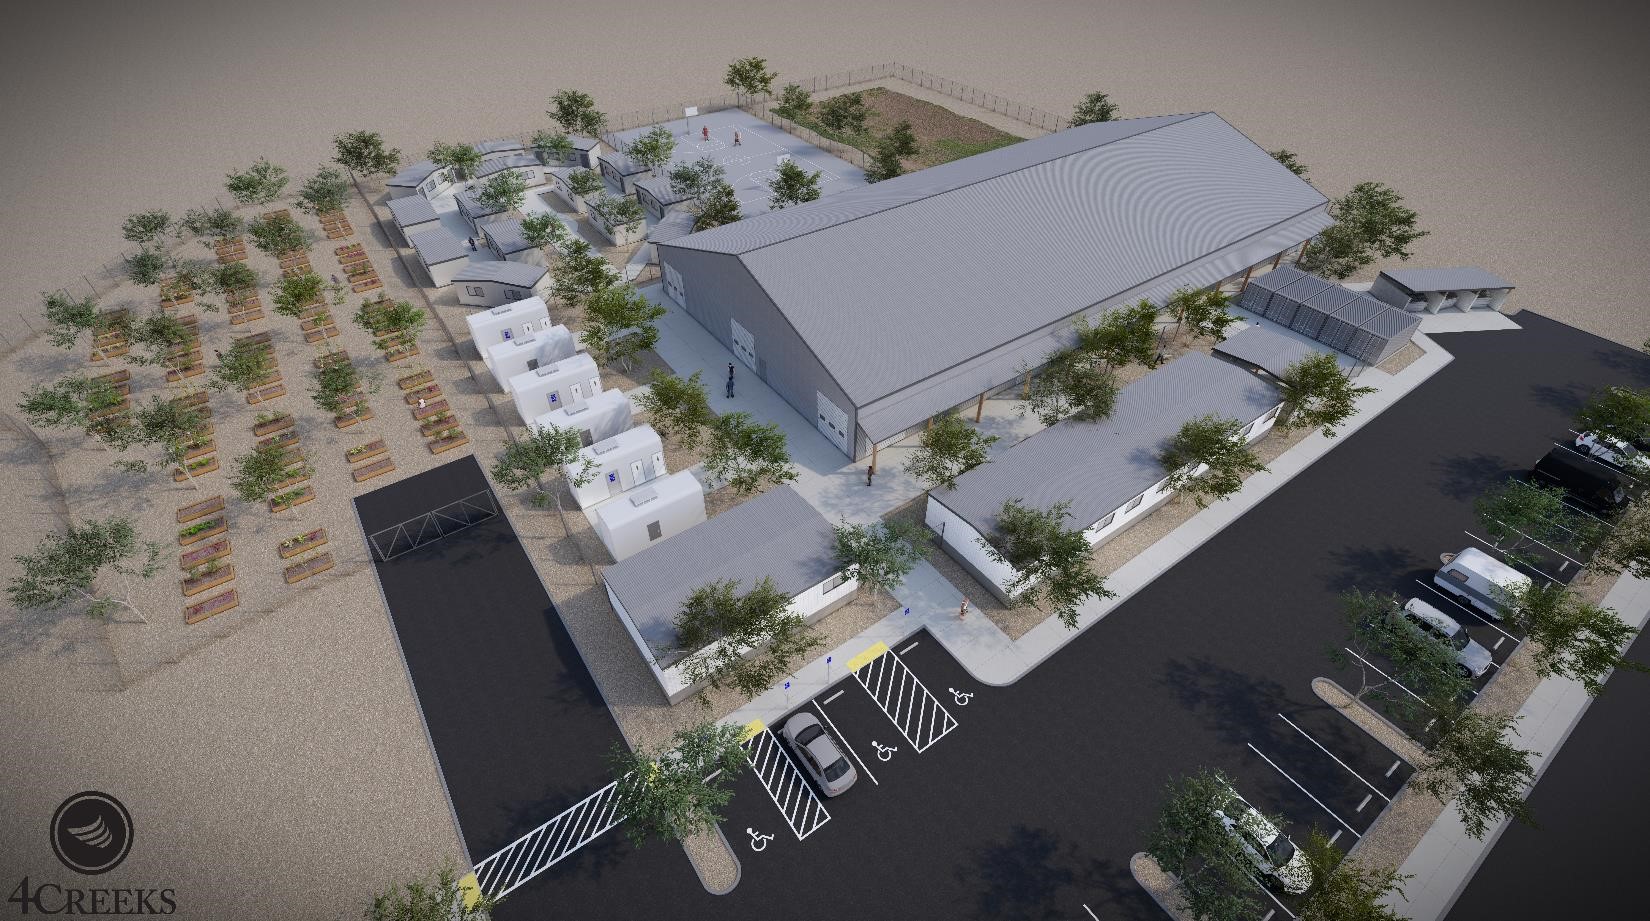 Tulare Homeless Shelter Rendering - Final_web - 220811